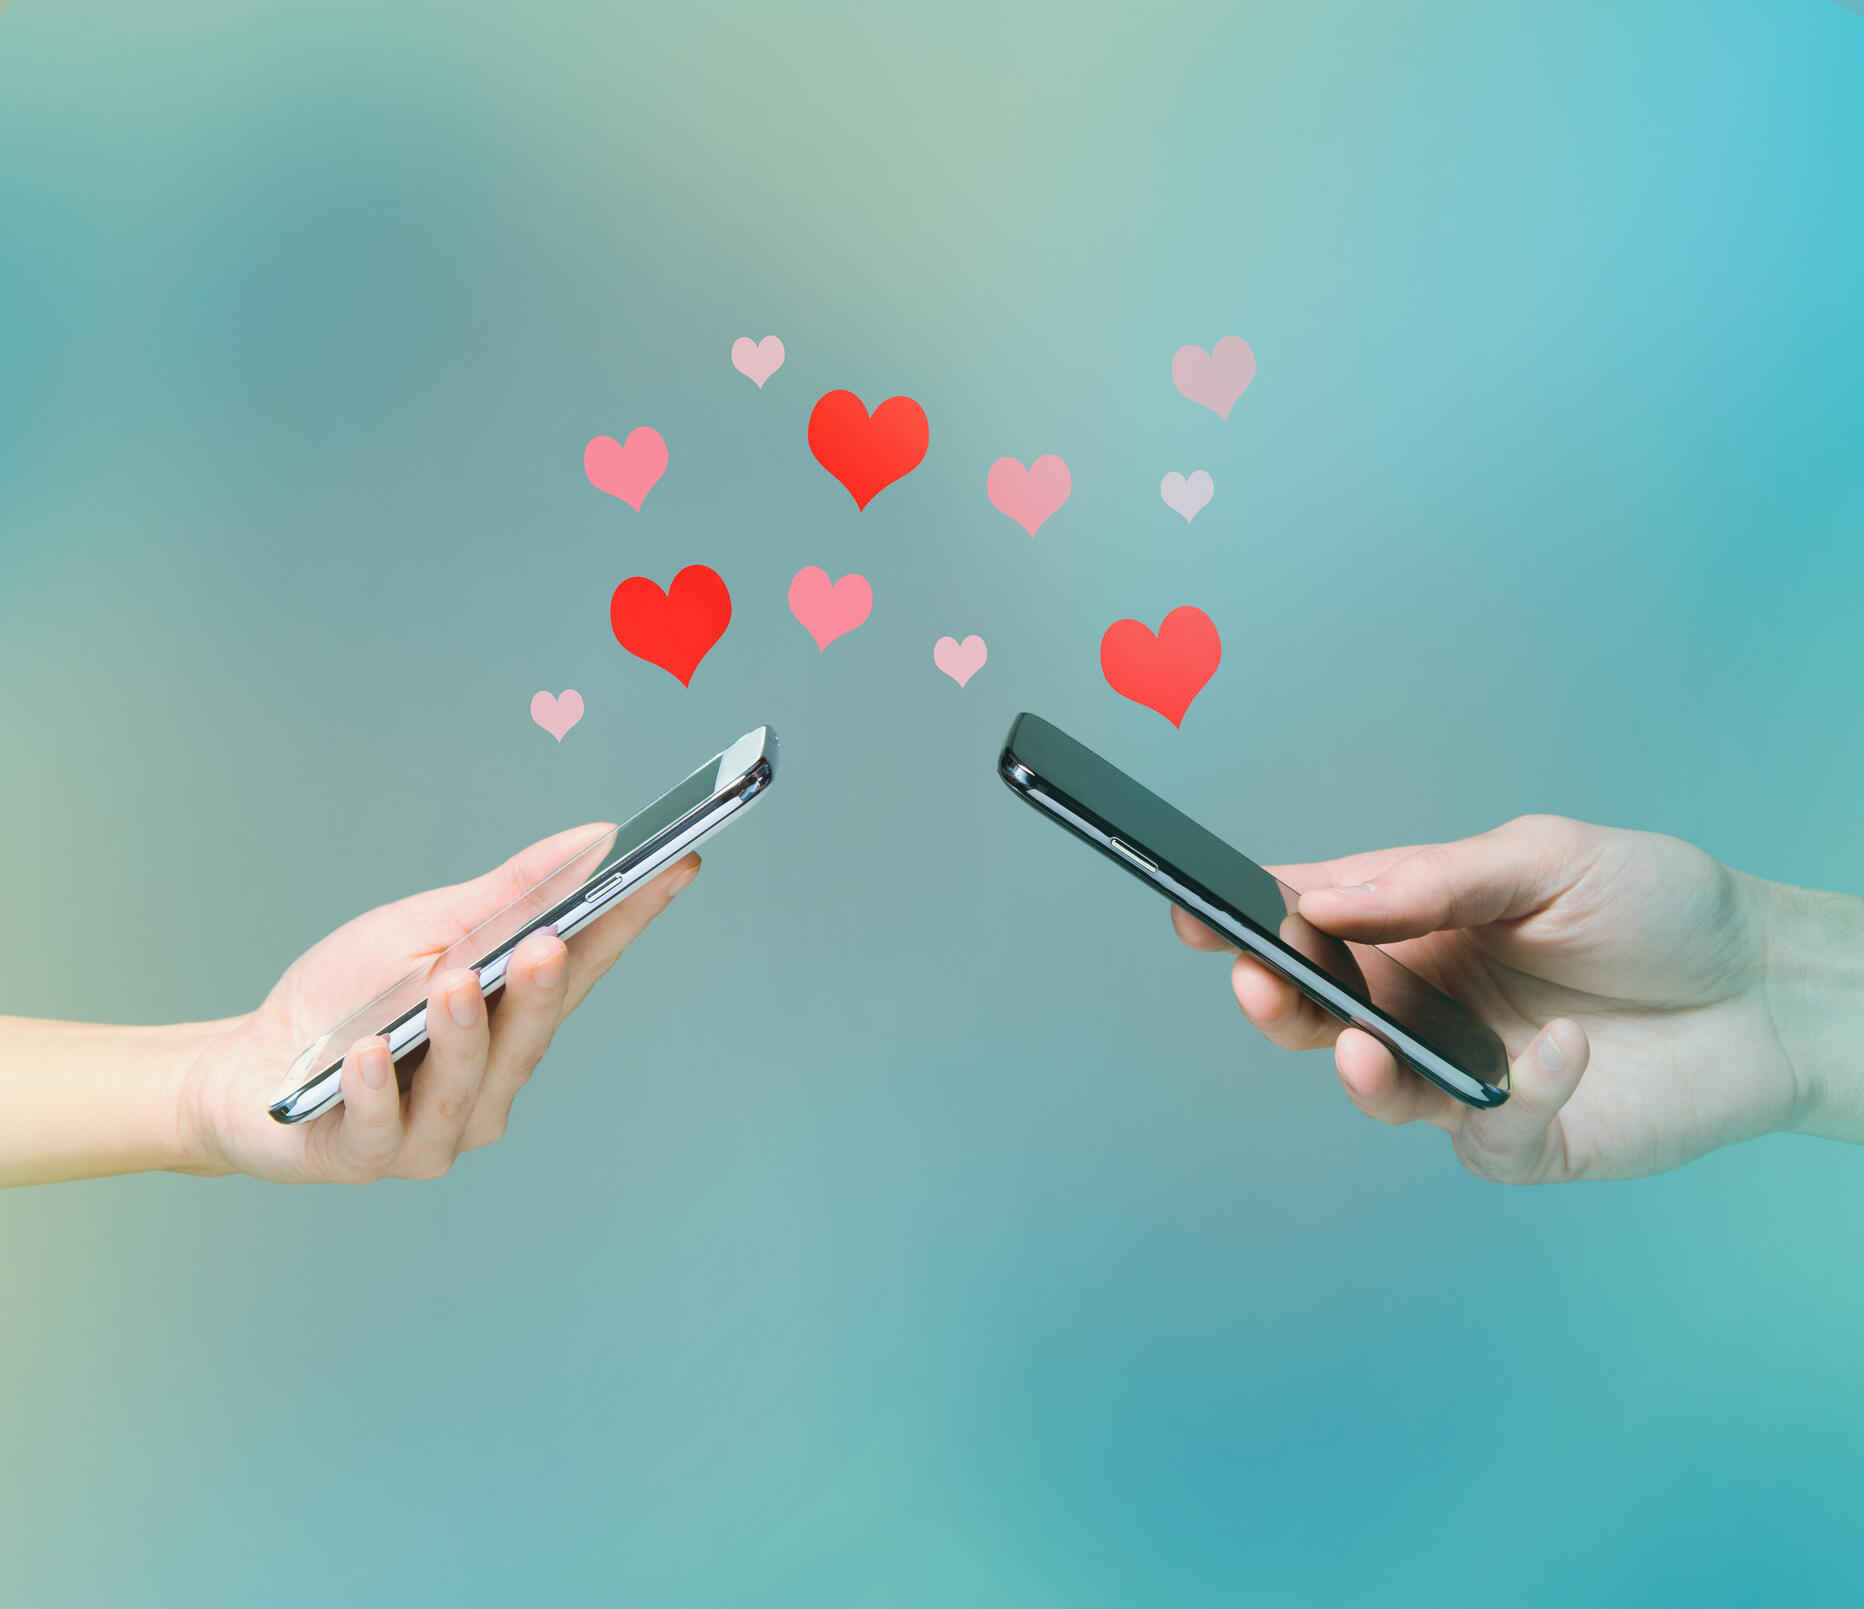 Young man and woman's hands holding smart phones with hearts floating over